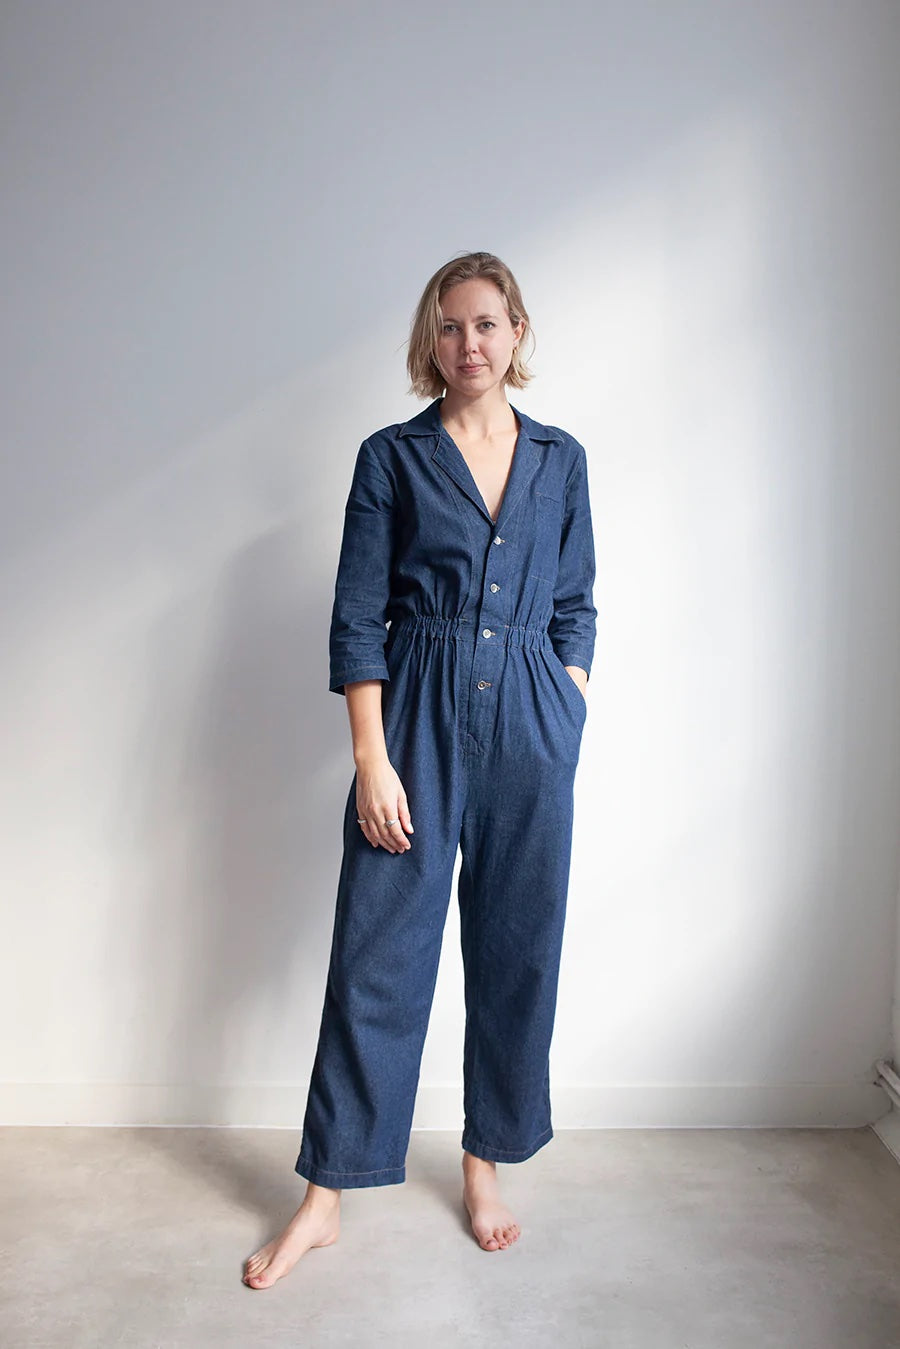 The Modern Sewing Co. Jesse Jumpsuit